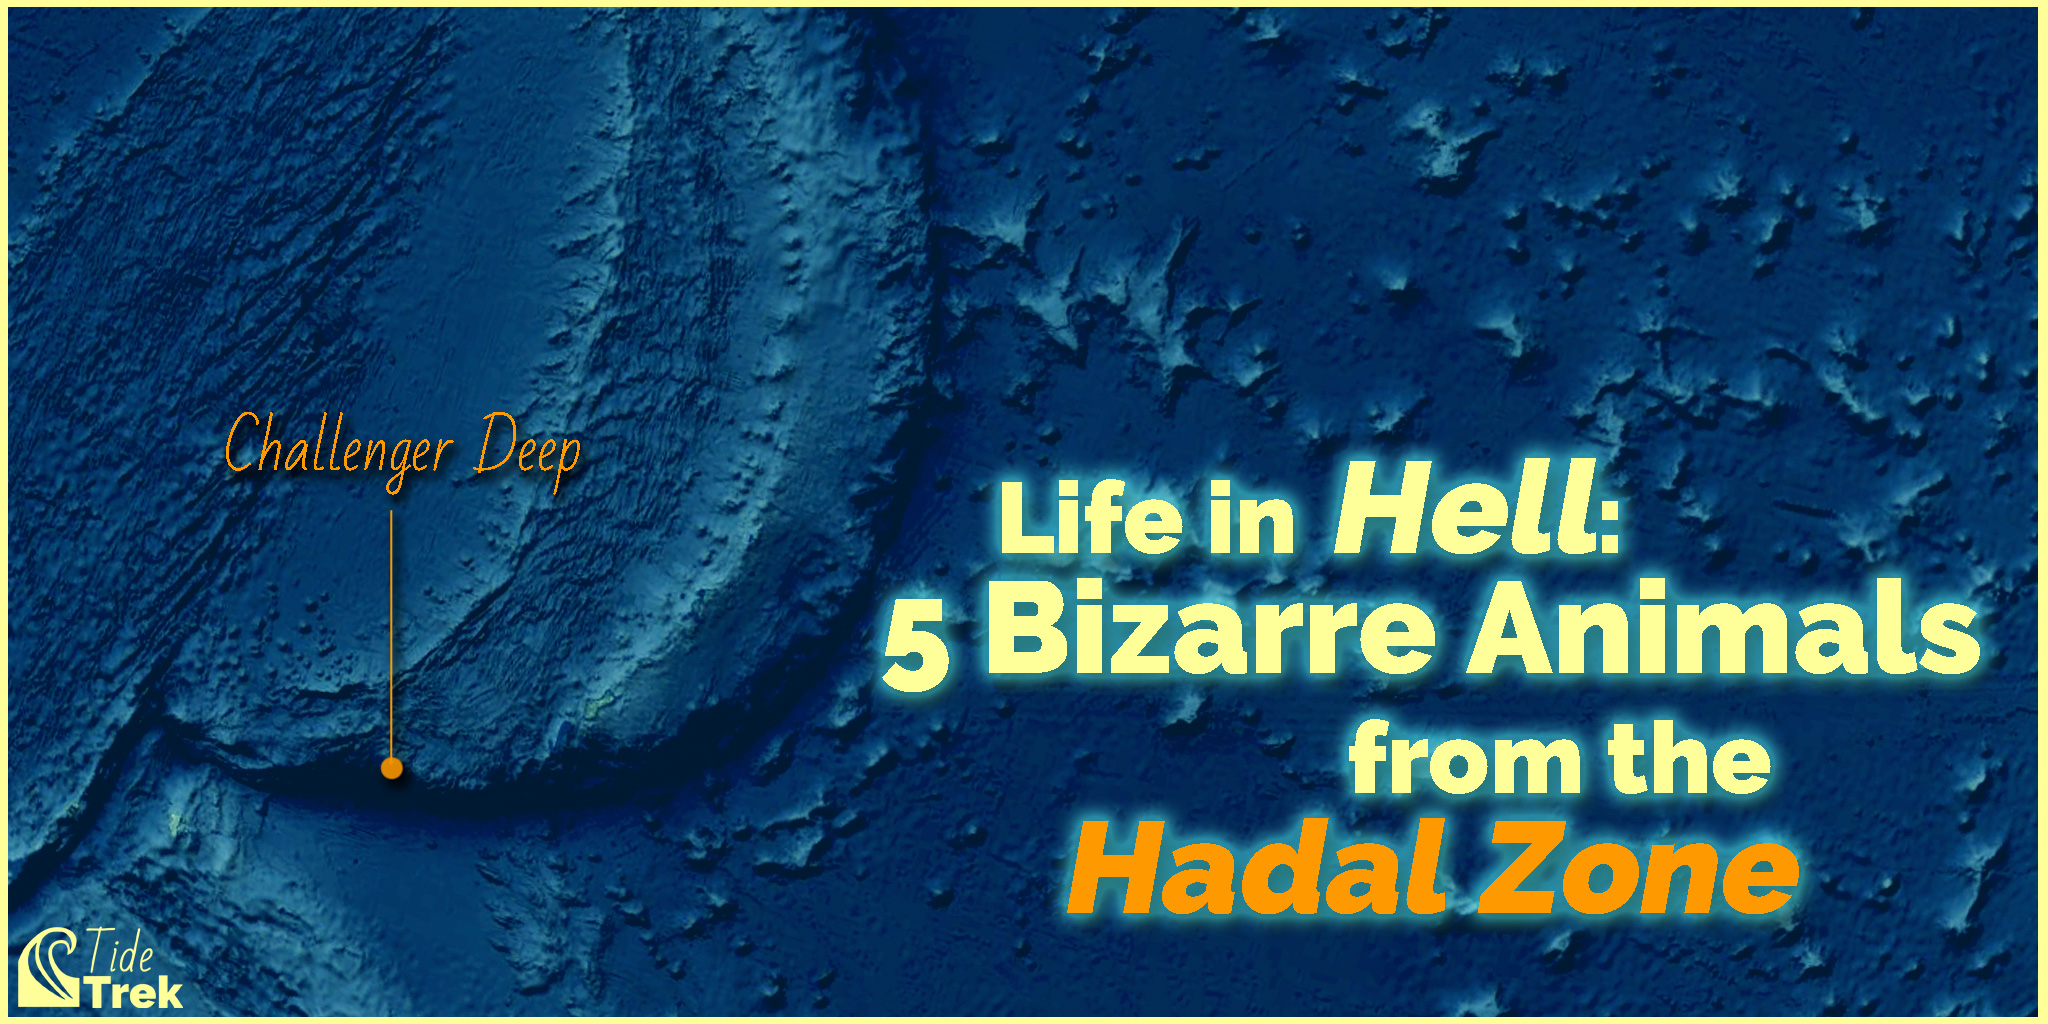 Five bizarre animals from the hadal zone